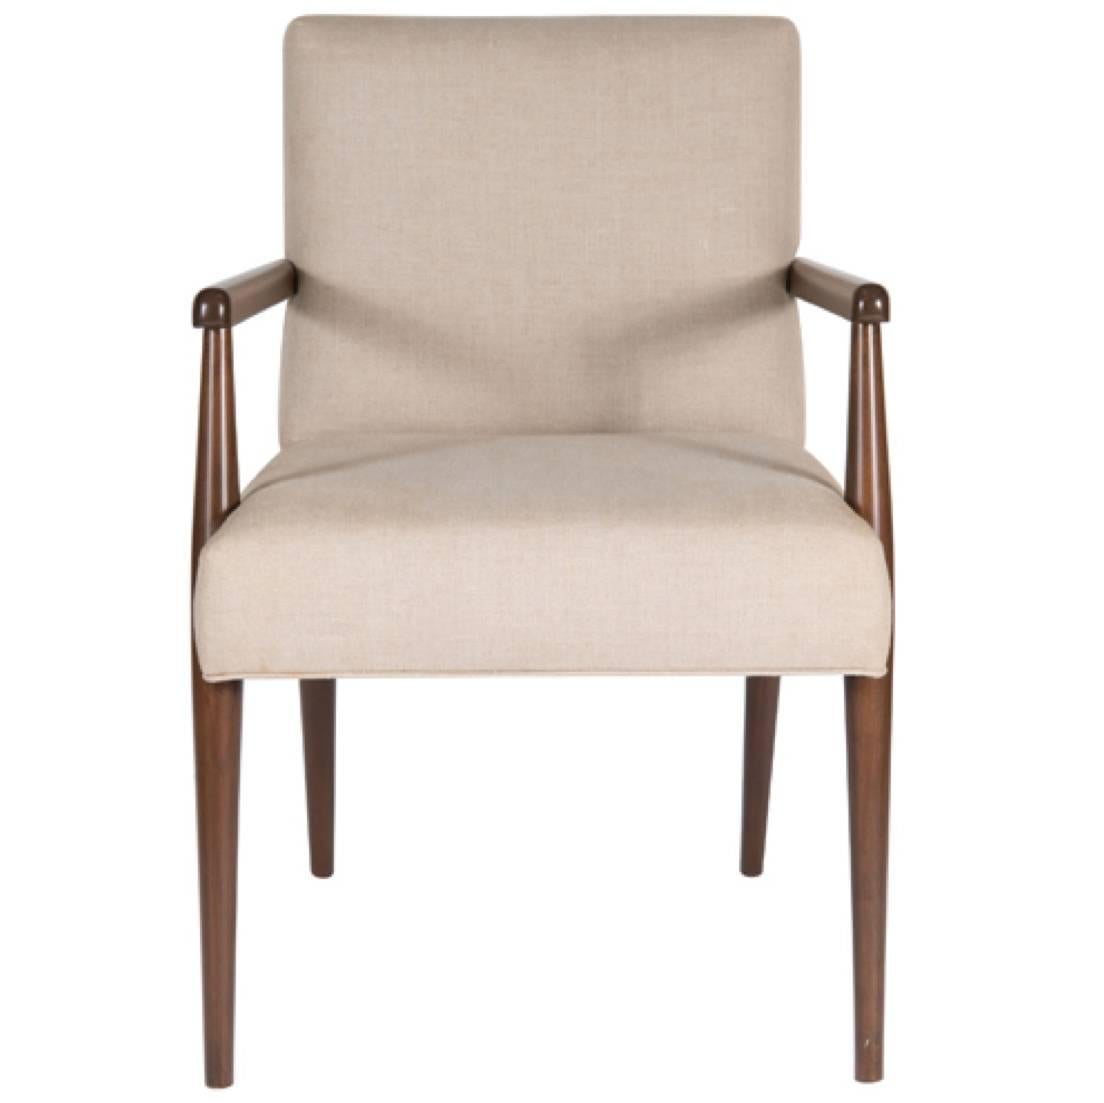 Sheppard Dowel Leg Arm Dining Chair For Sale